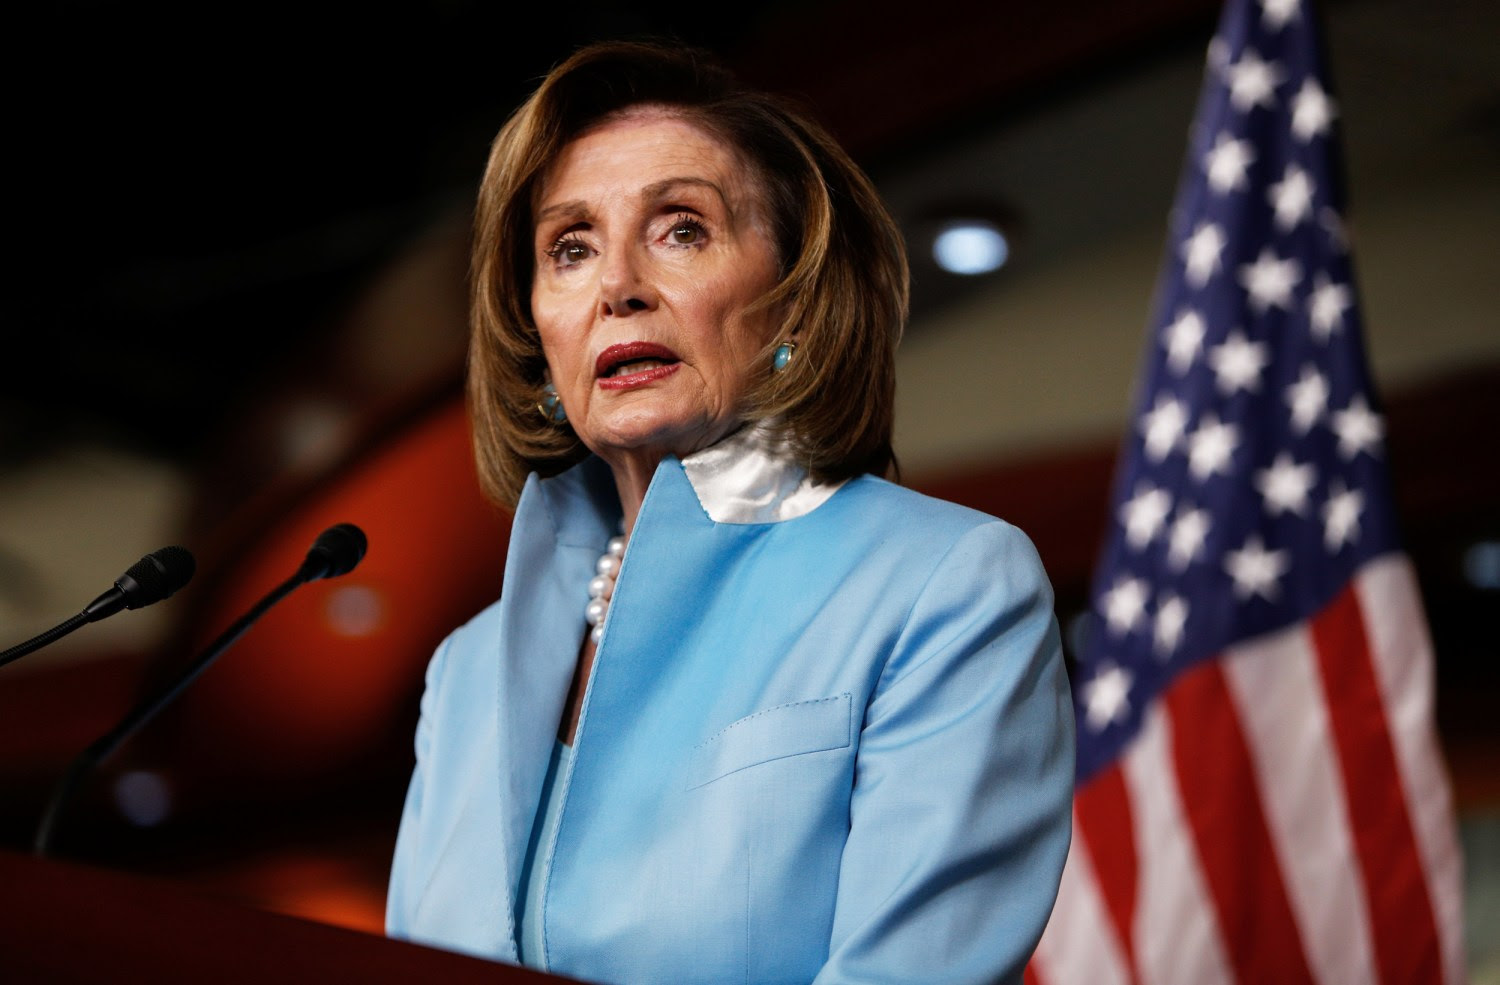 Why are several top Democrats suddenly turning on Nancy Pelosi?